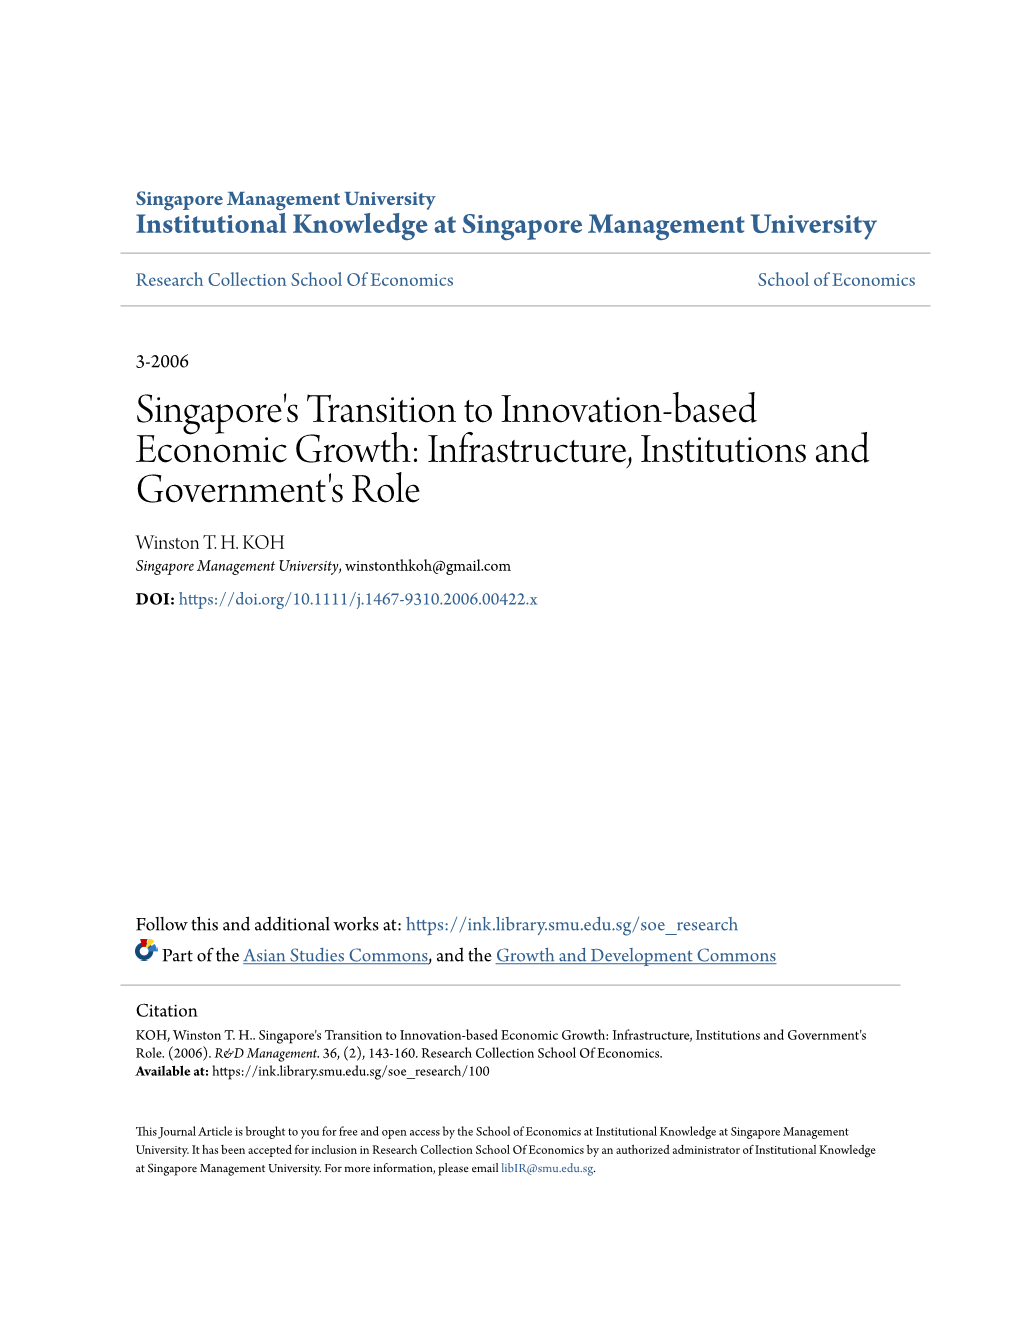 Singapore's Transition to Innovation-Based Economic Growth: Infrastructure, Institutions and Government's Role Winston T